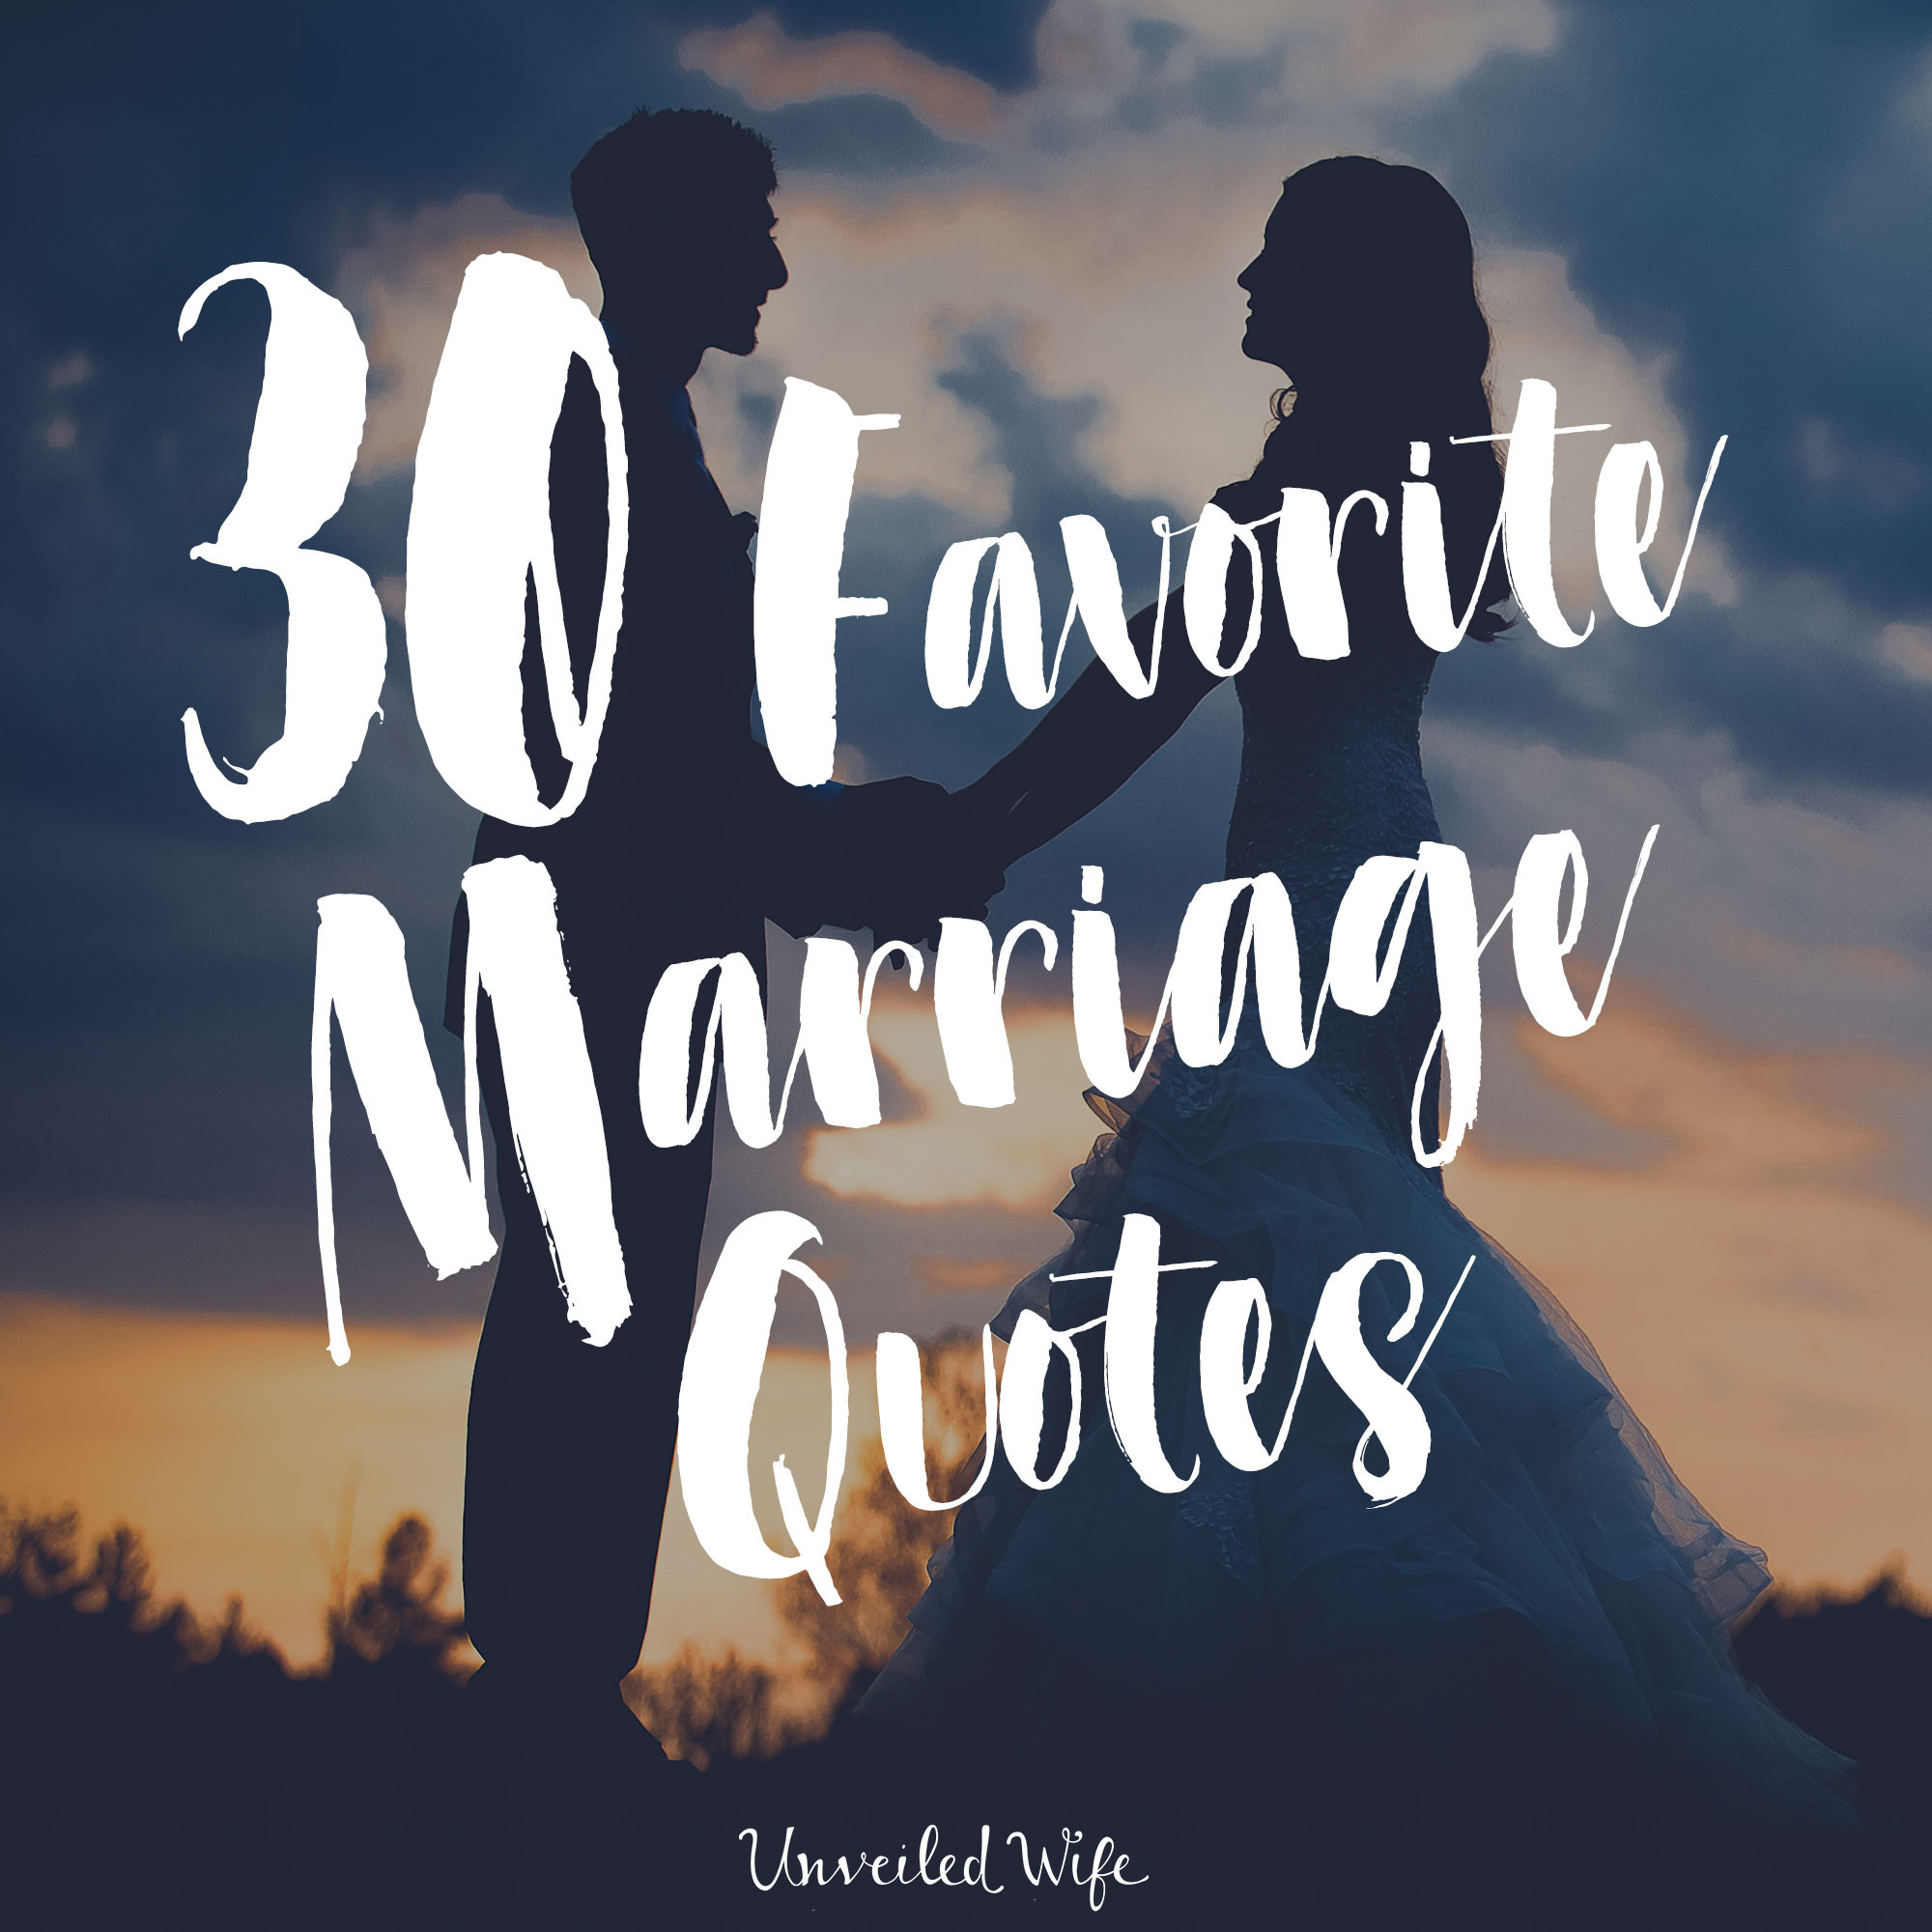 Biblical Marriage Quotes
 30 Favorite Marriage Quotes & Bible Verses